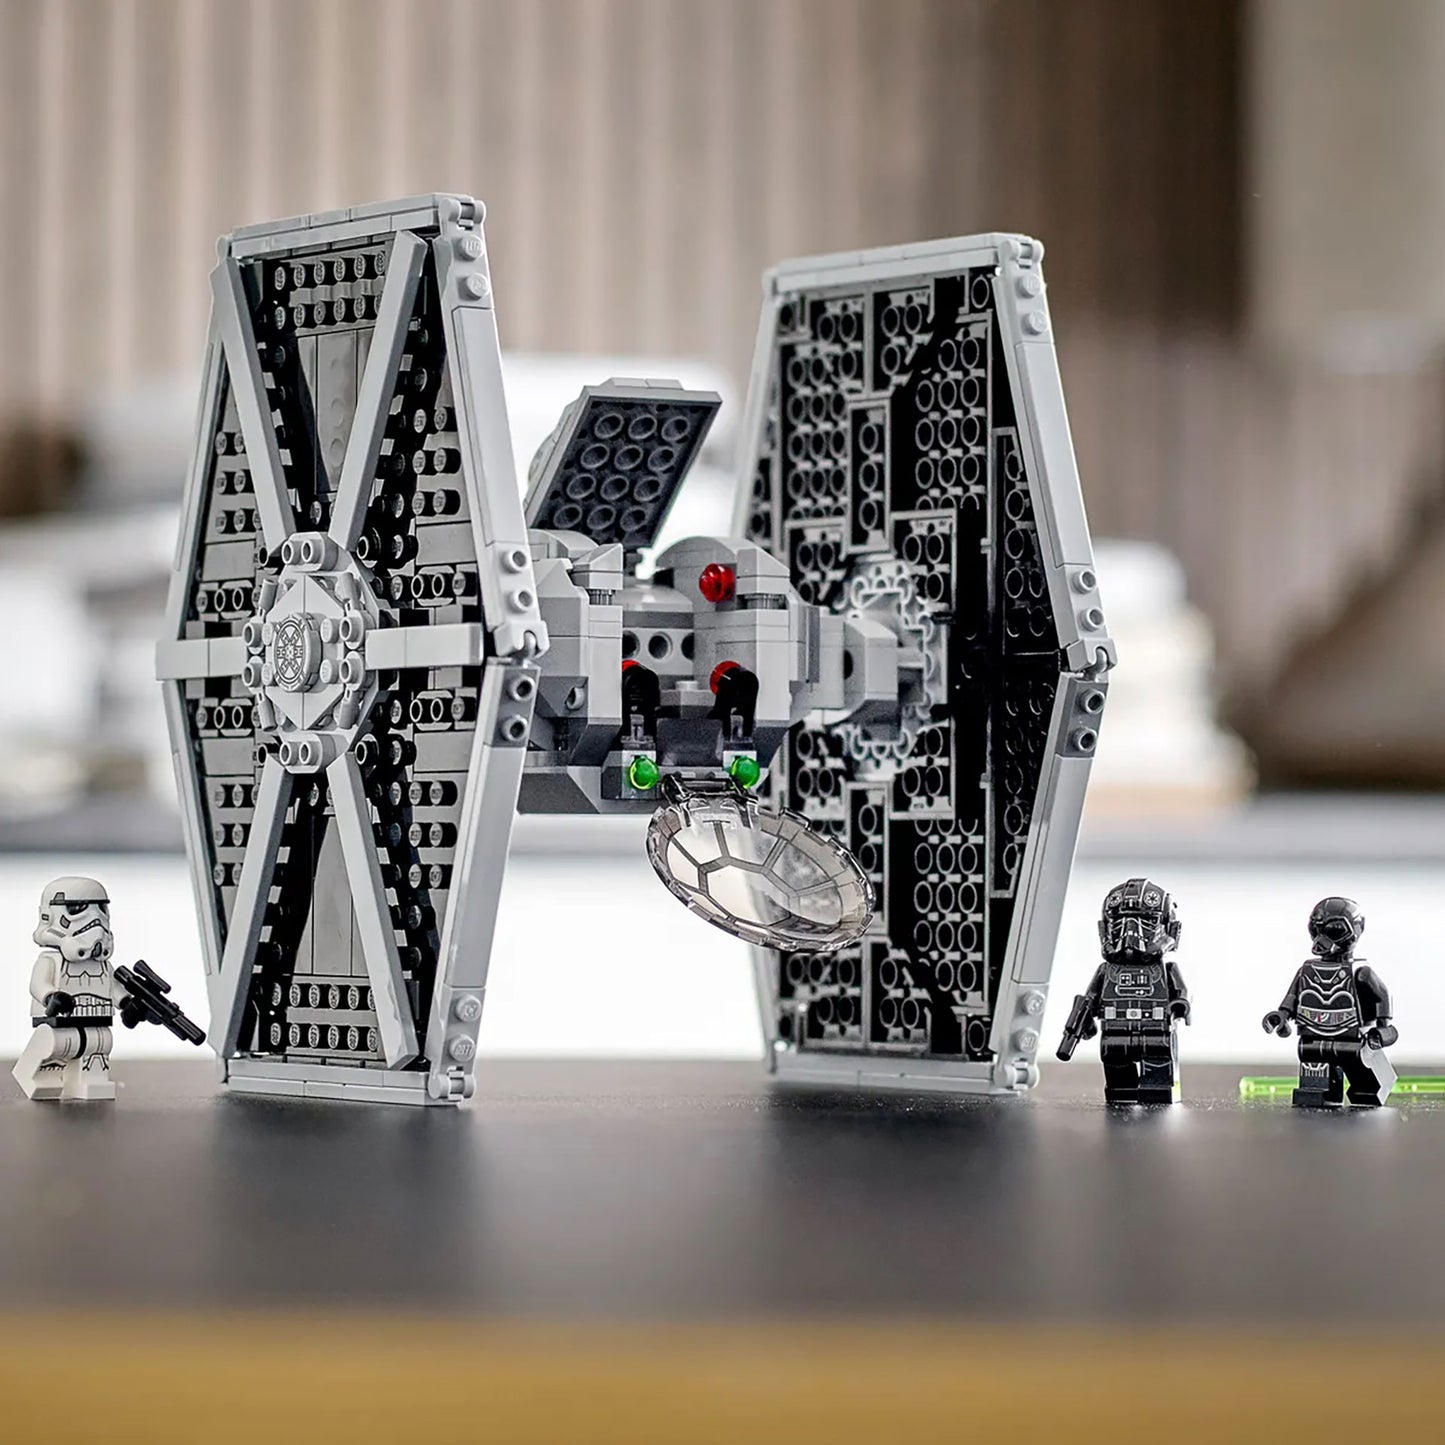 LEGO Imperial TIE Fighter